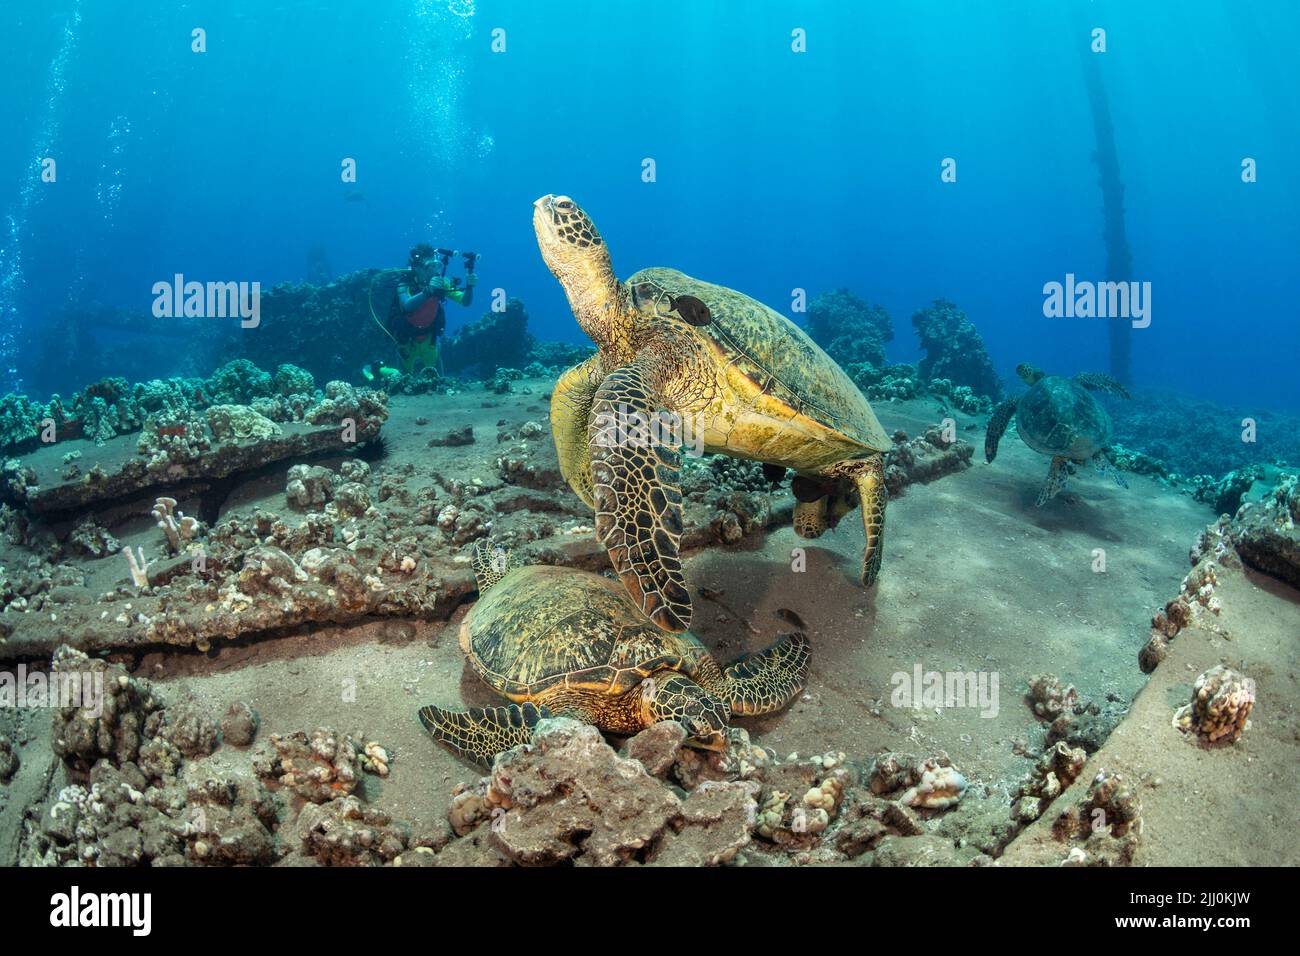 Green sea turtles, Chelonia mydas, and a diver (MR) with a camera over the remains of Mala Wharf, Maui, Hawaii. Stock Photo